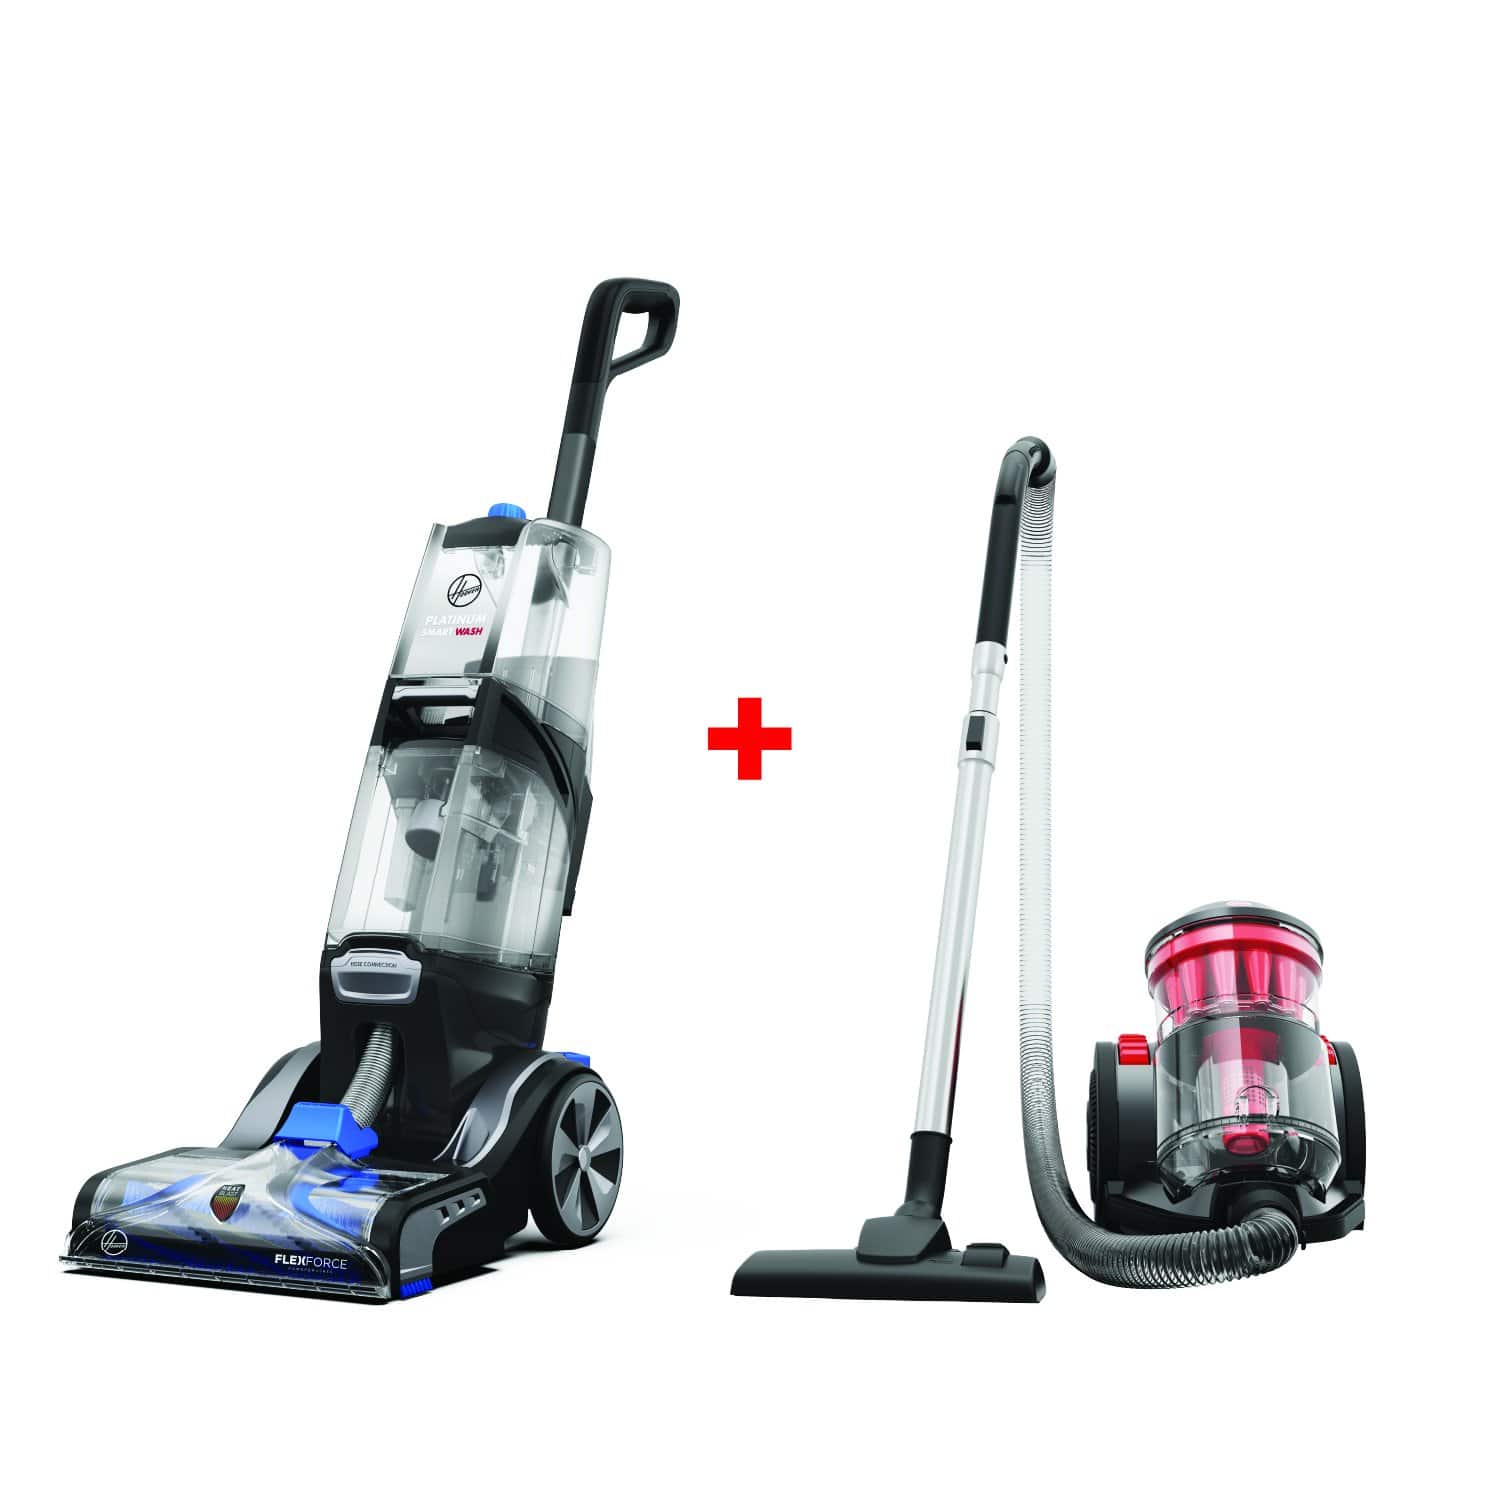 Hoover Platinum Smart Wash Auotmatic Carpet Washer With Free Air Mini Vacuum Cleaner Worth AED 399 - CDCW-SWME+CDCY-AMME Bundle